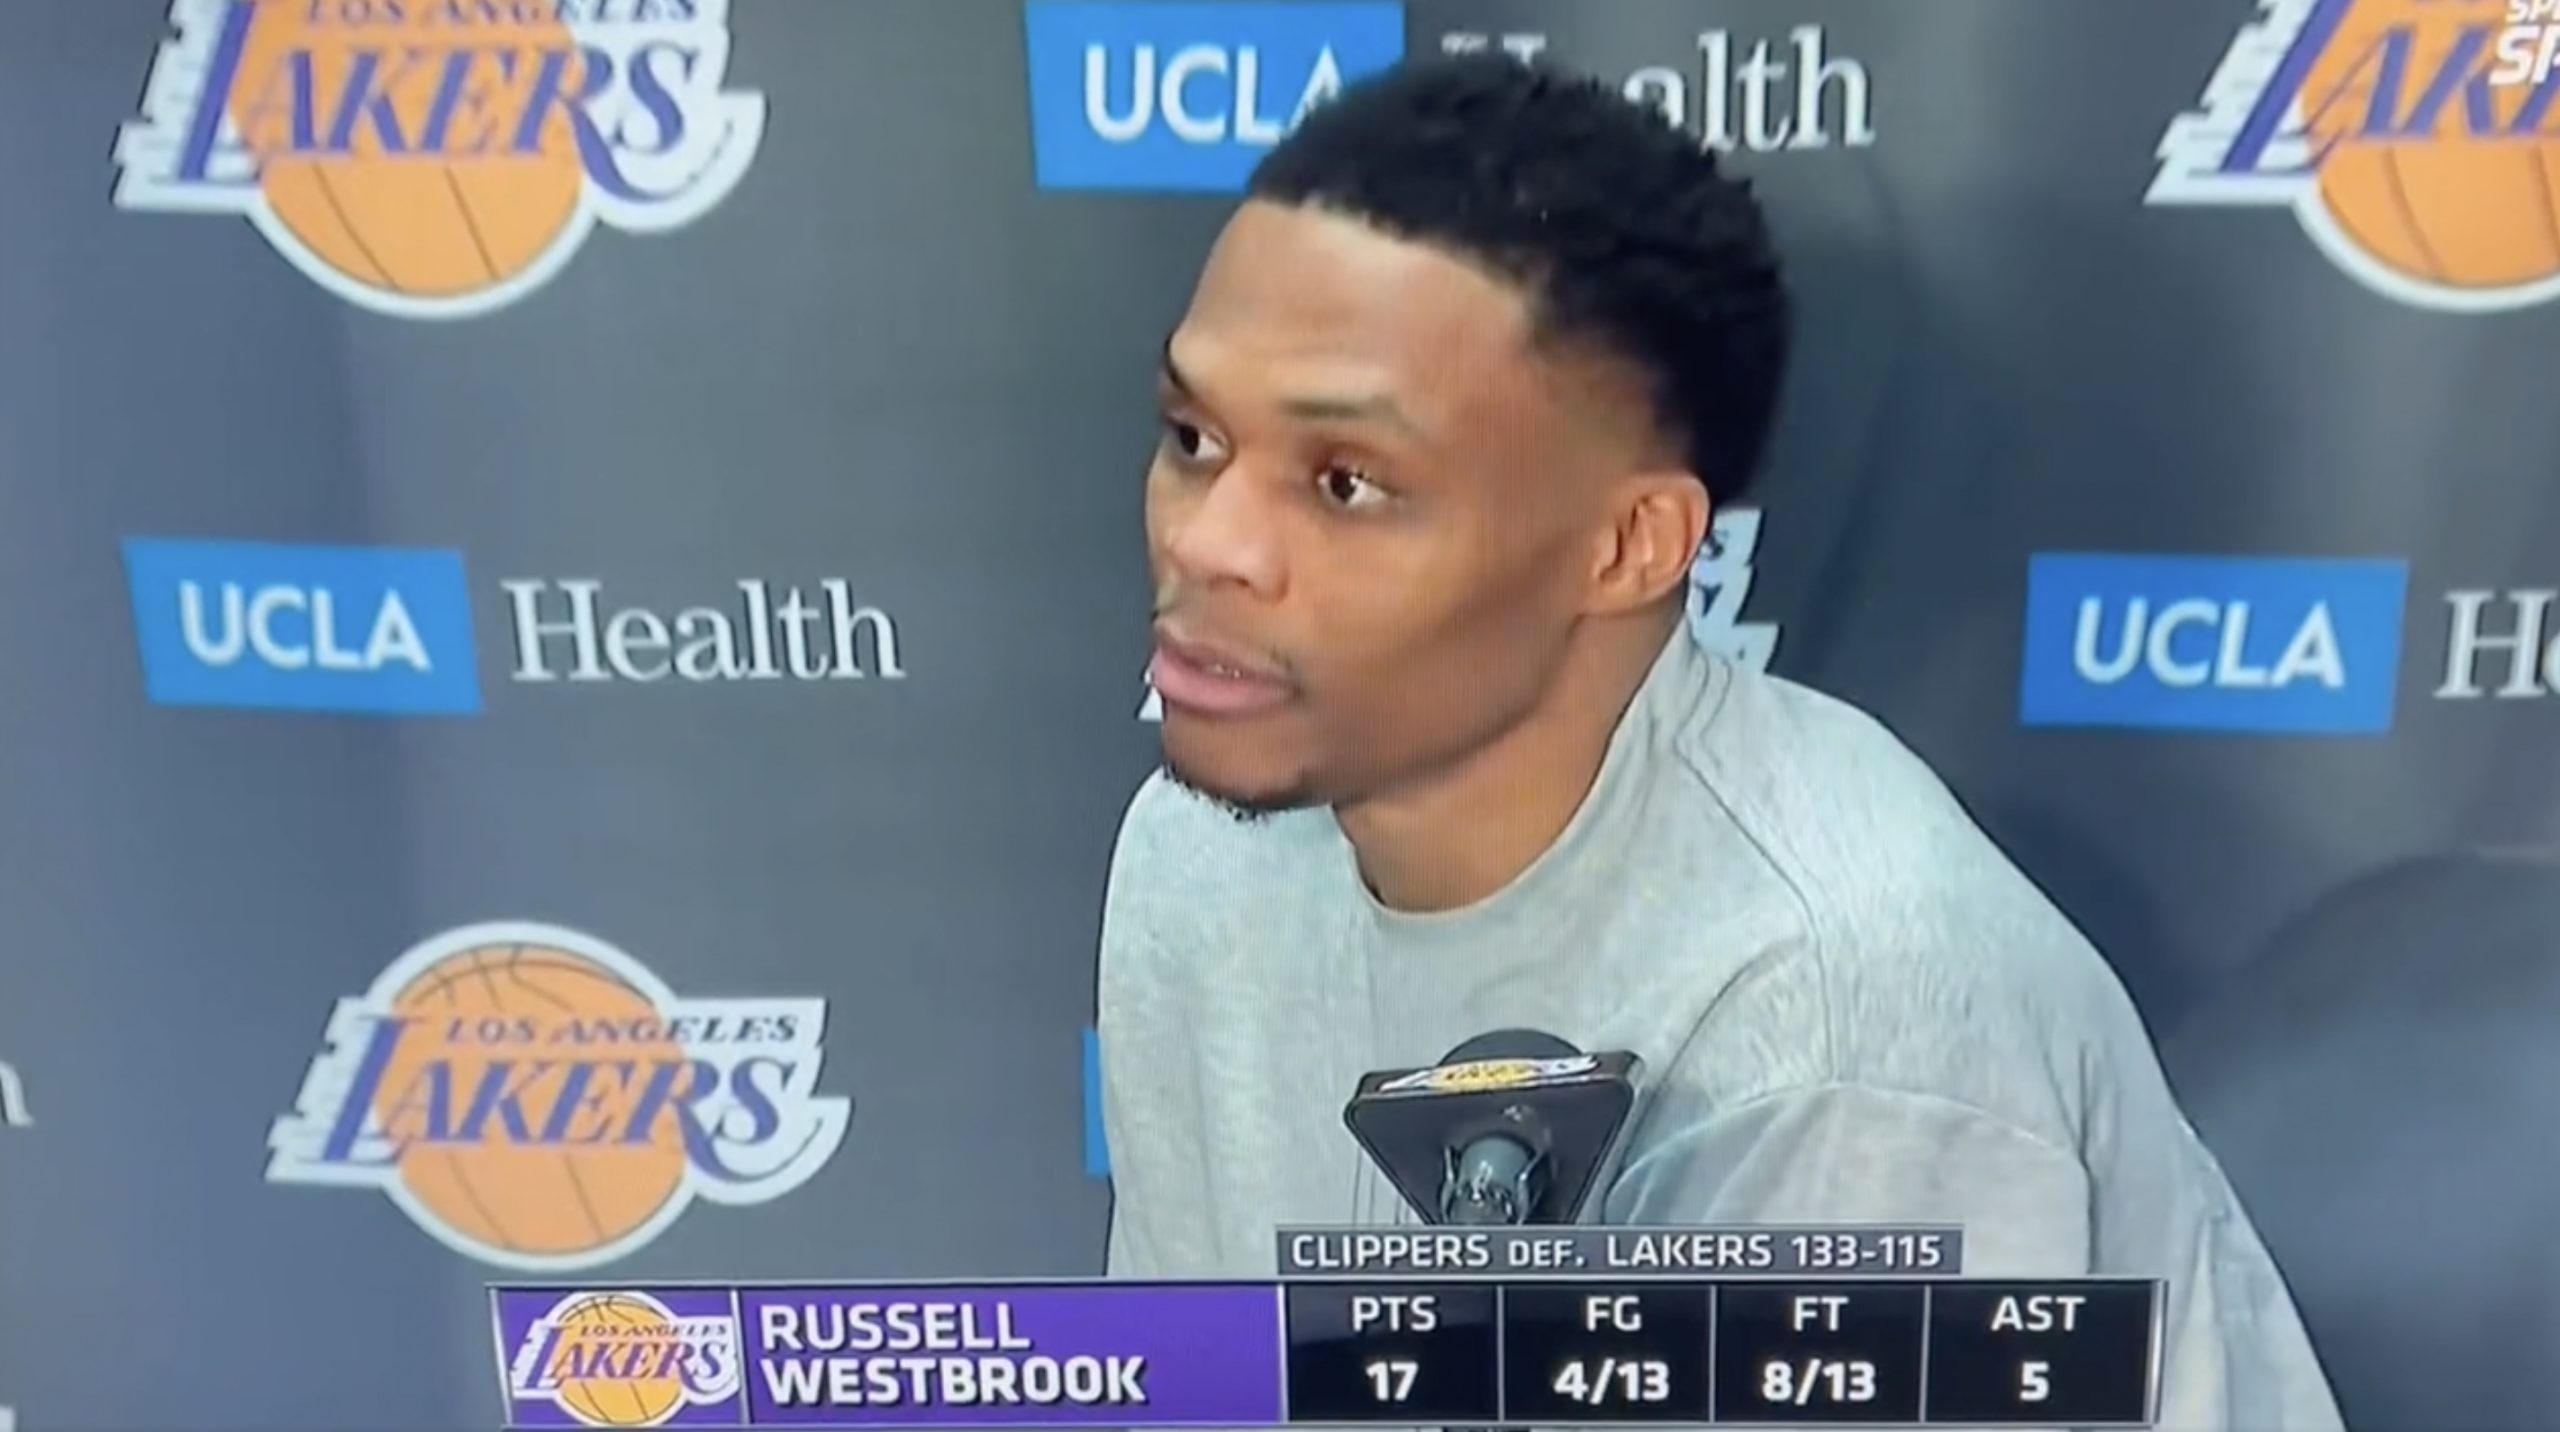 Russell Westbrook postgame